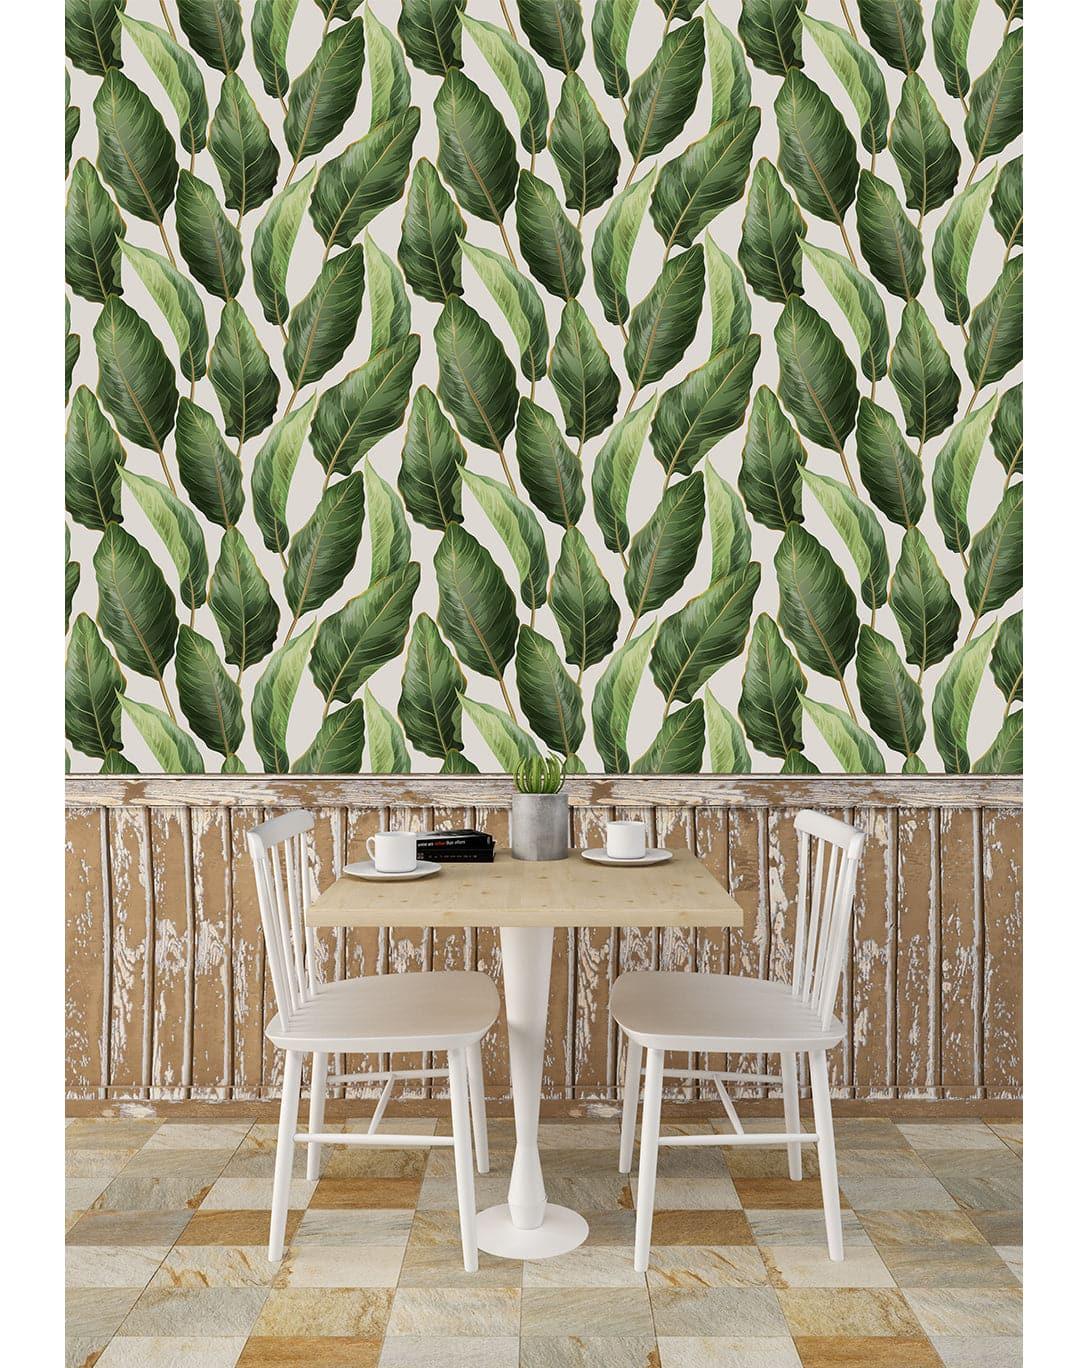 Colorful Tropical Palm Leaves Wall Mural Tropical Banana Leaves Removable Wallpaper Tropical Banana Leaves Removable Wallpaper 